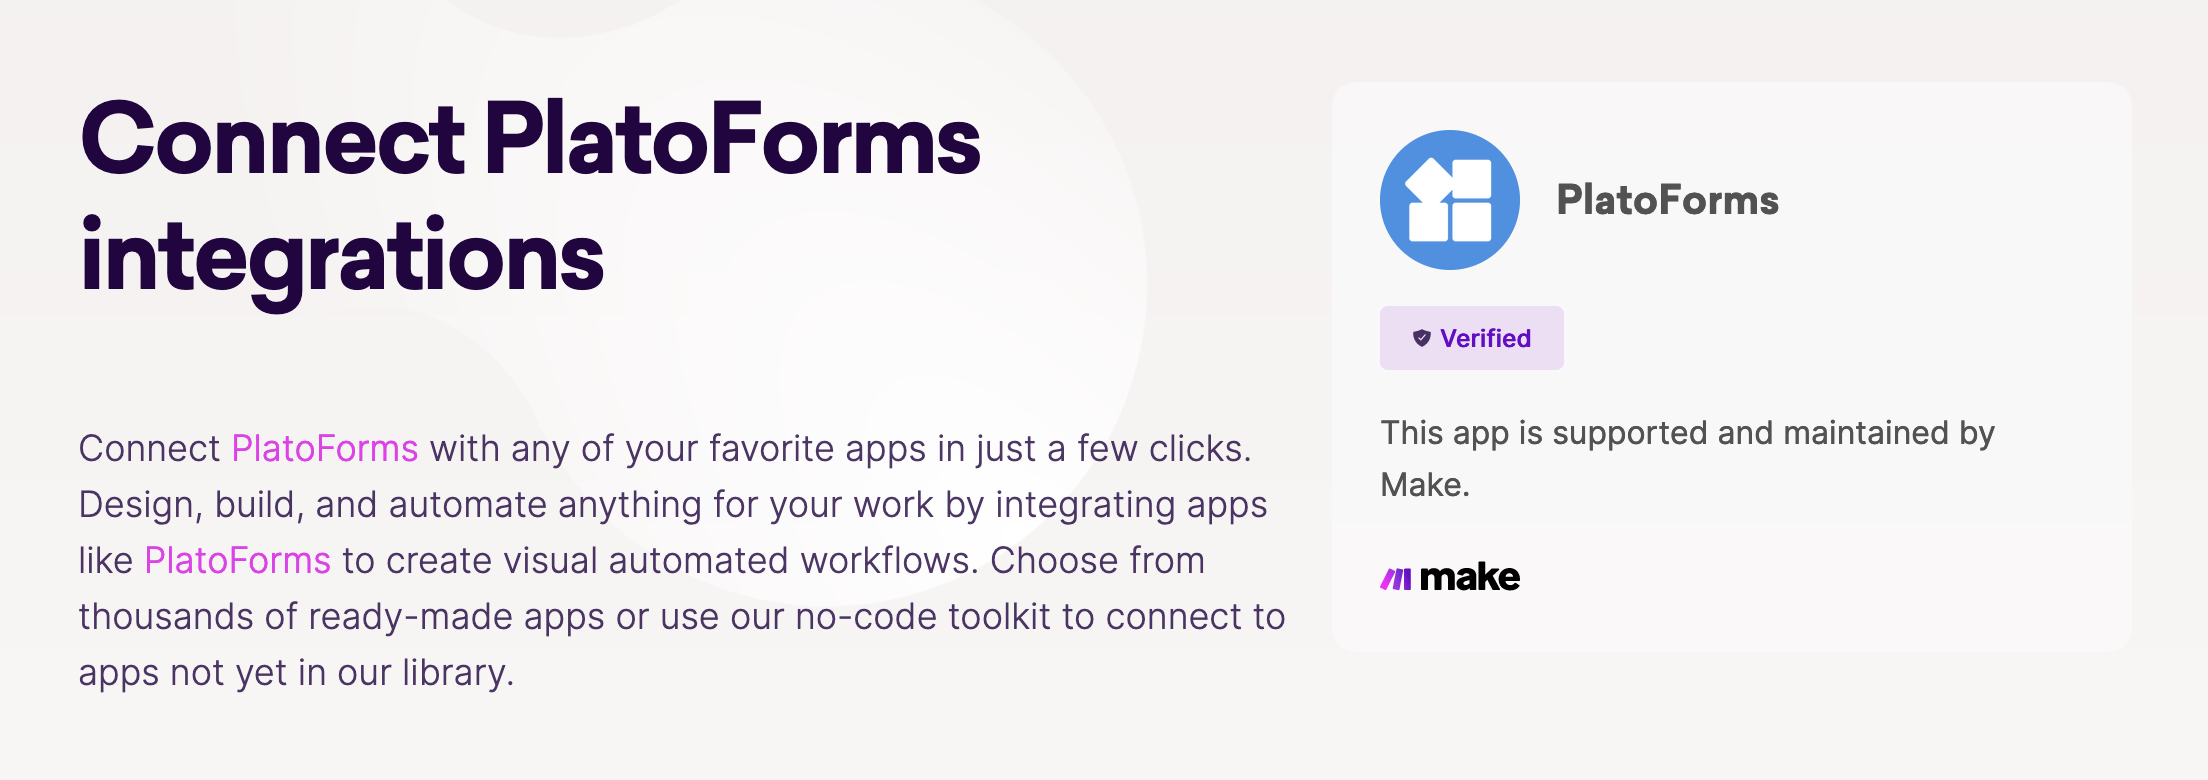 Connect PlatoForms with any of your favorite apps in just a few clicks, by integrating with Make